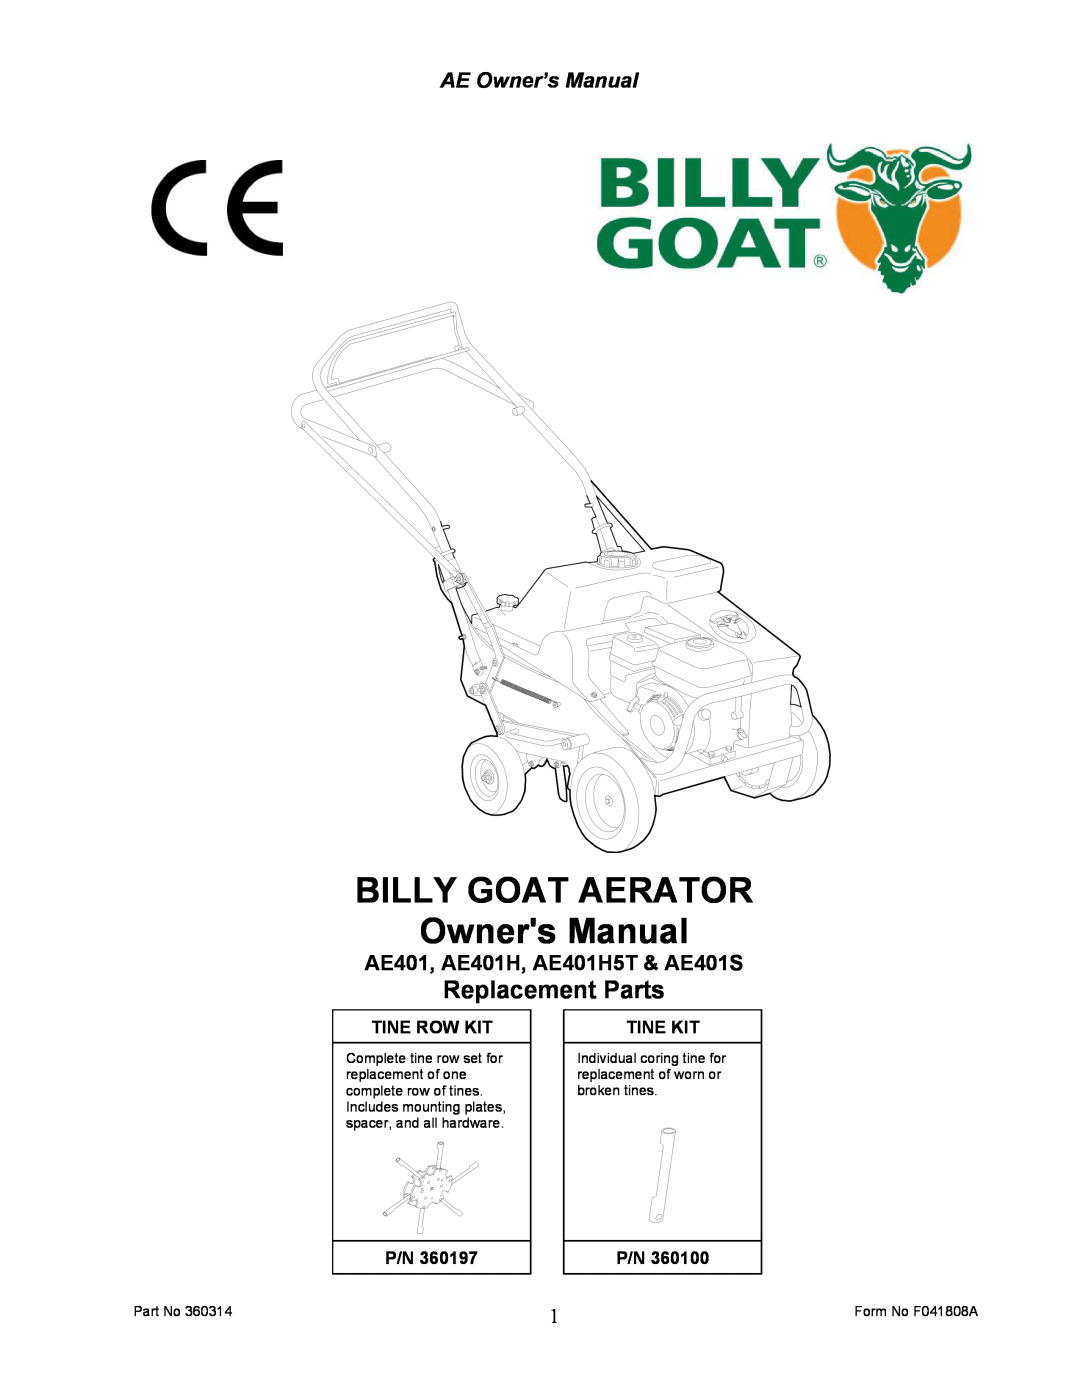 Billy Goat owner manual Replacement Parts, AE401, AE401H, AE401H5T & AE401S, Tine Row Kit, Tine Kit 